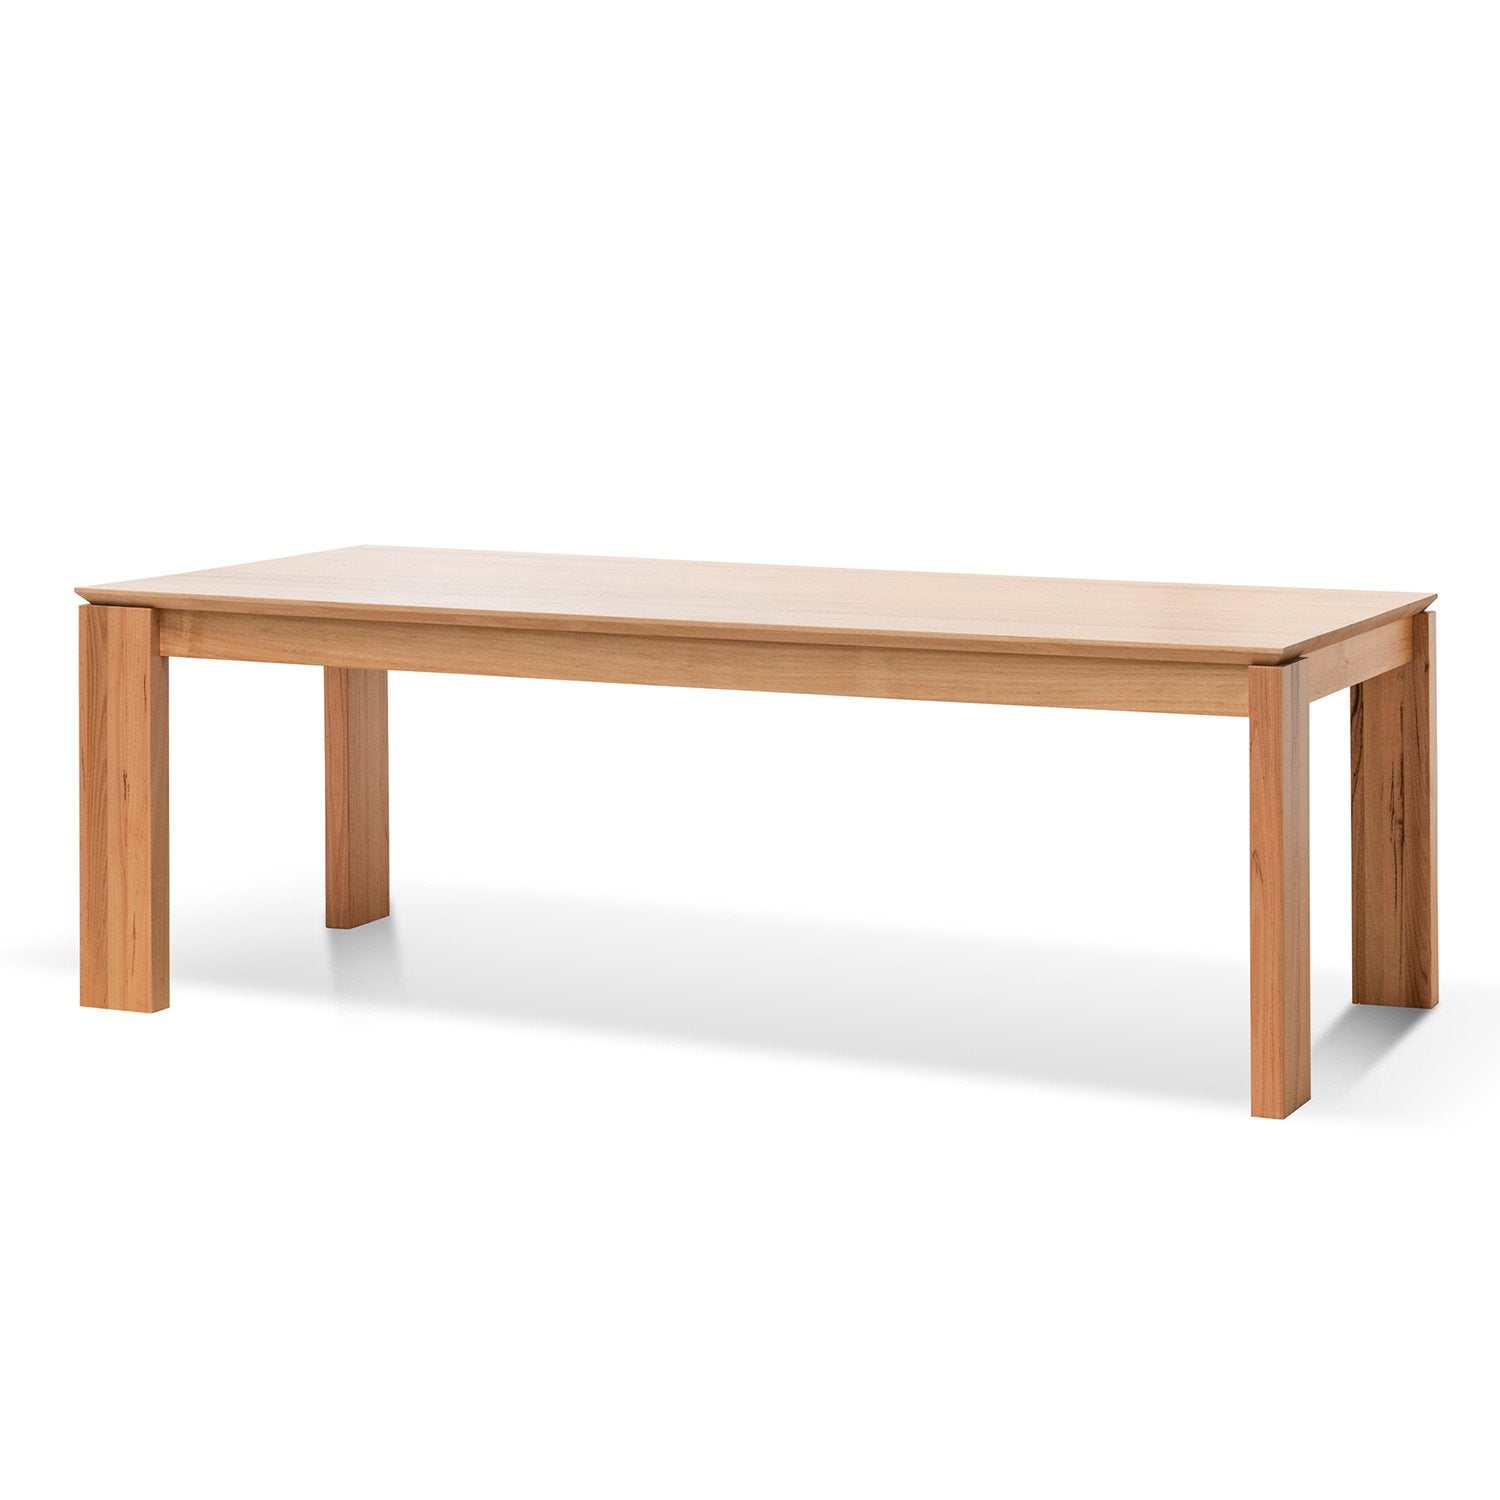 Amparo 2.4m Dining Table - Messmate - Dining Tables